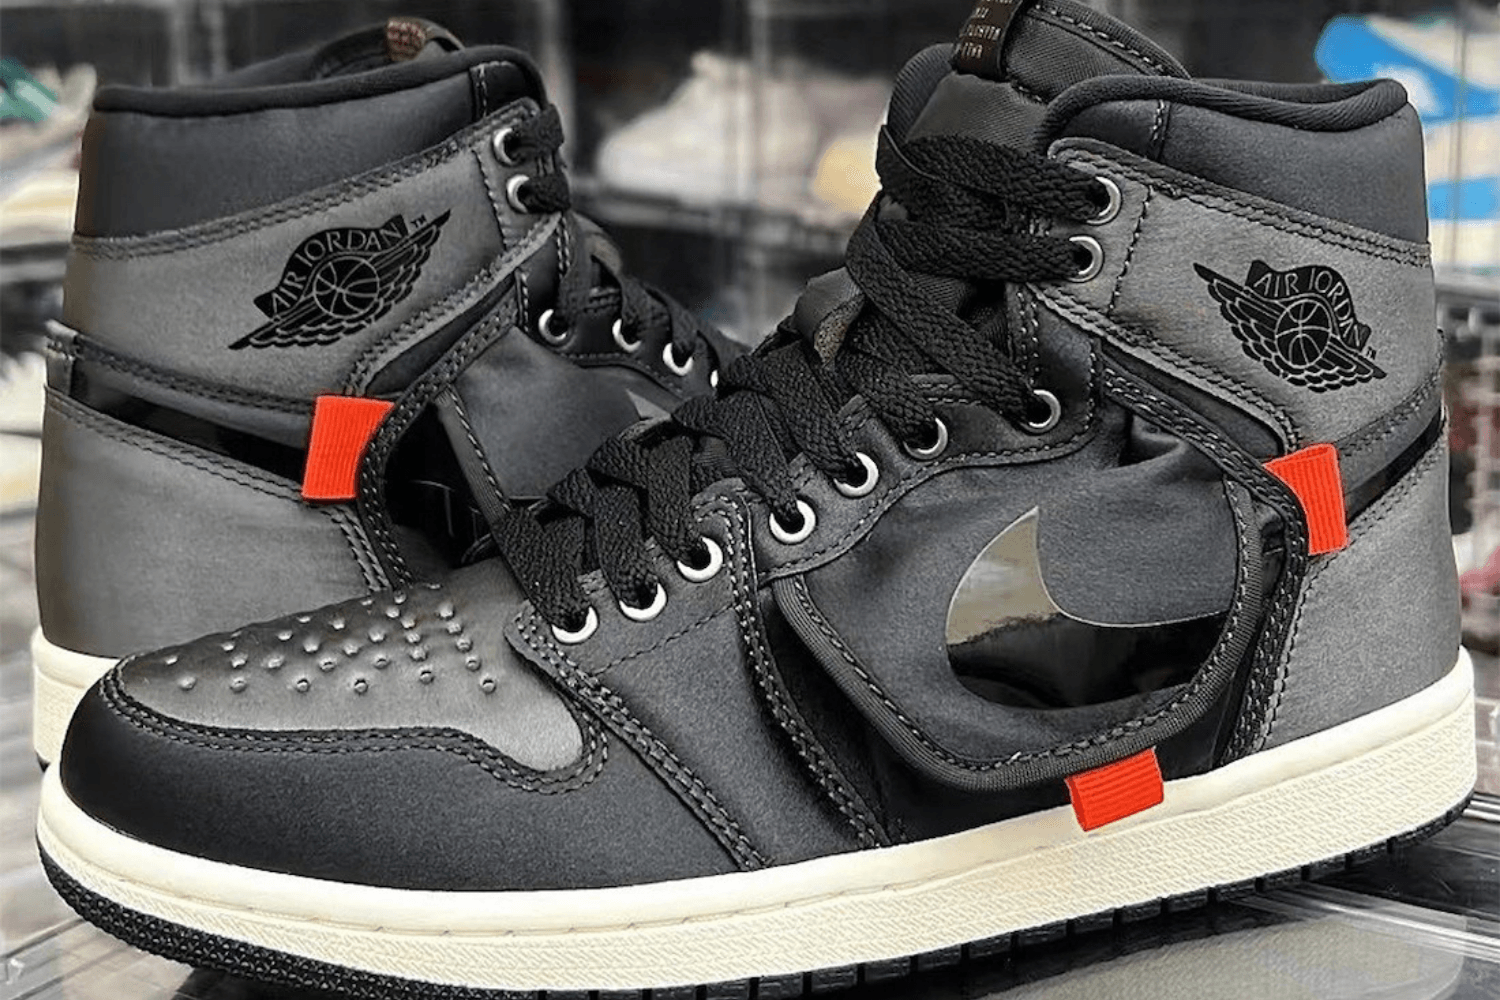 The first images of the Air Jordan 1 High OG SP 'Utility'